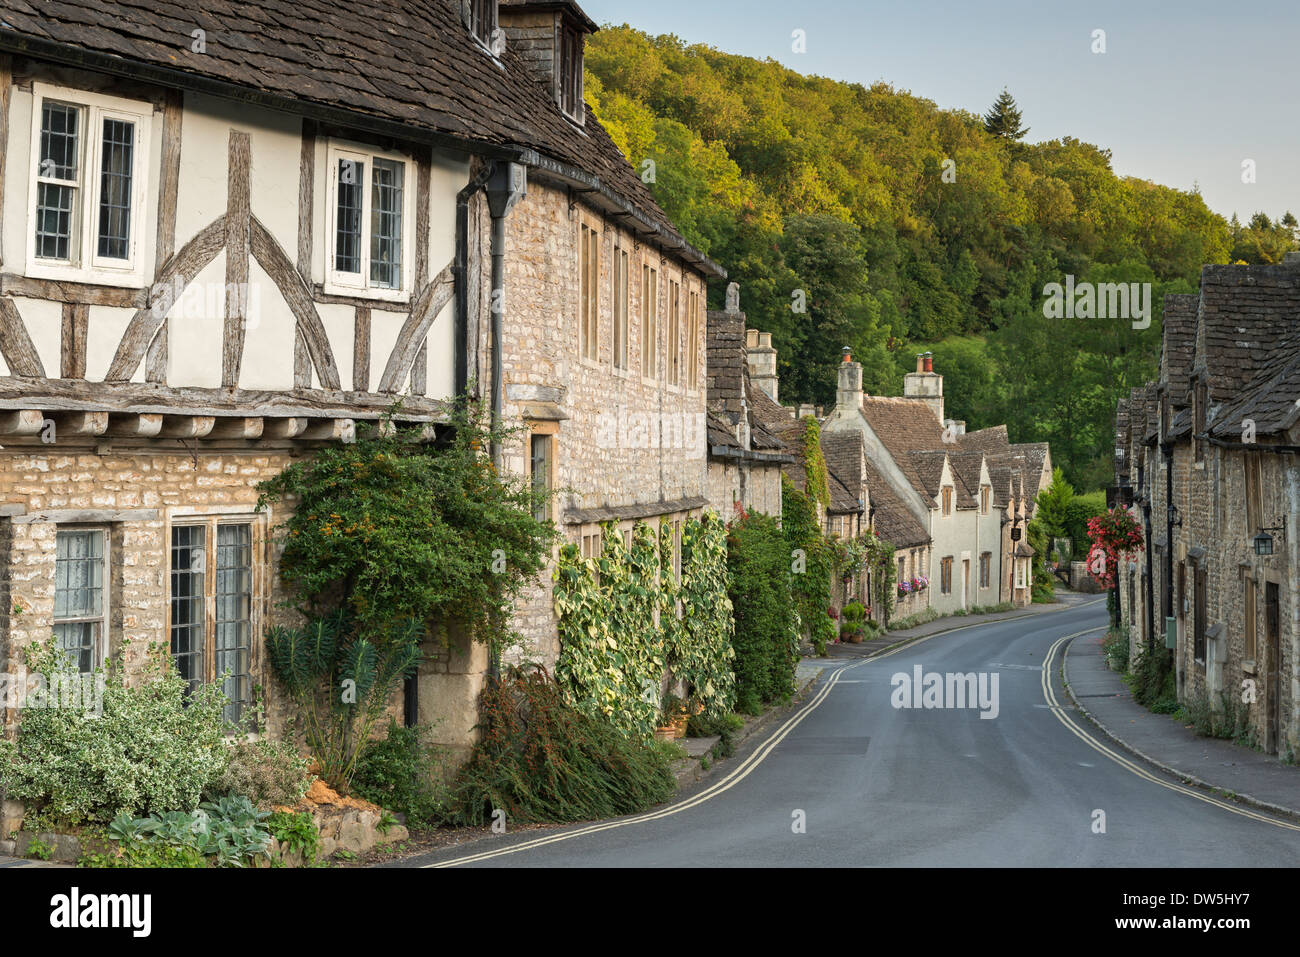 Picturesque Cotswolds village of Castle Combe, Wiltshire, England. Stock Photo